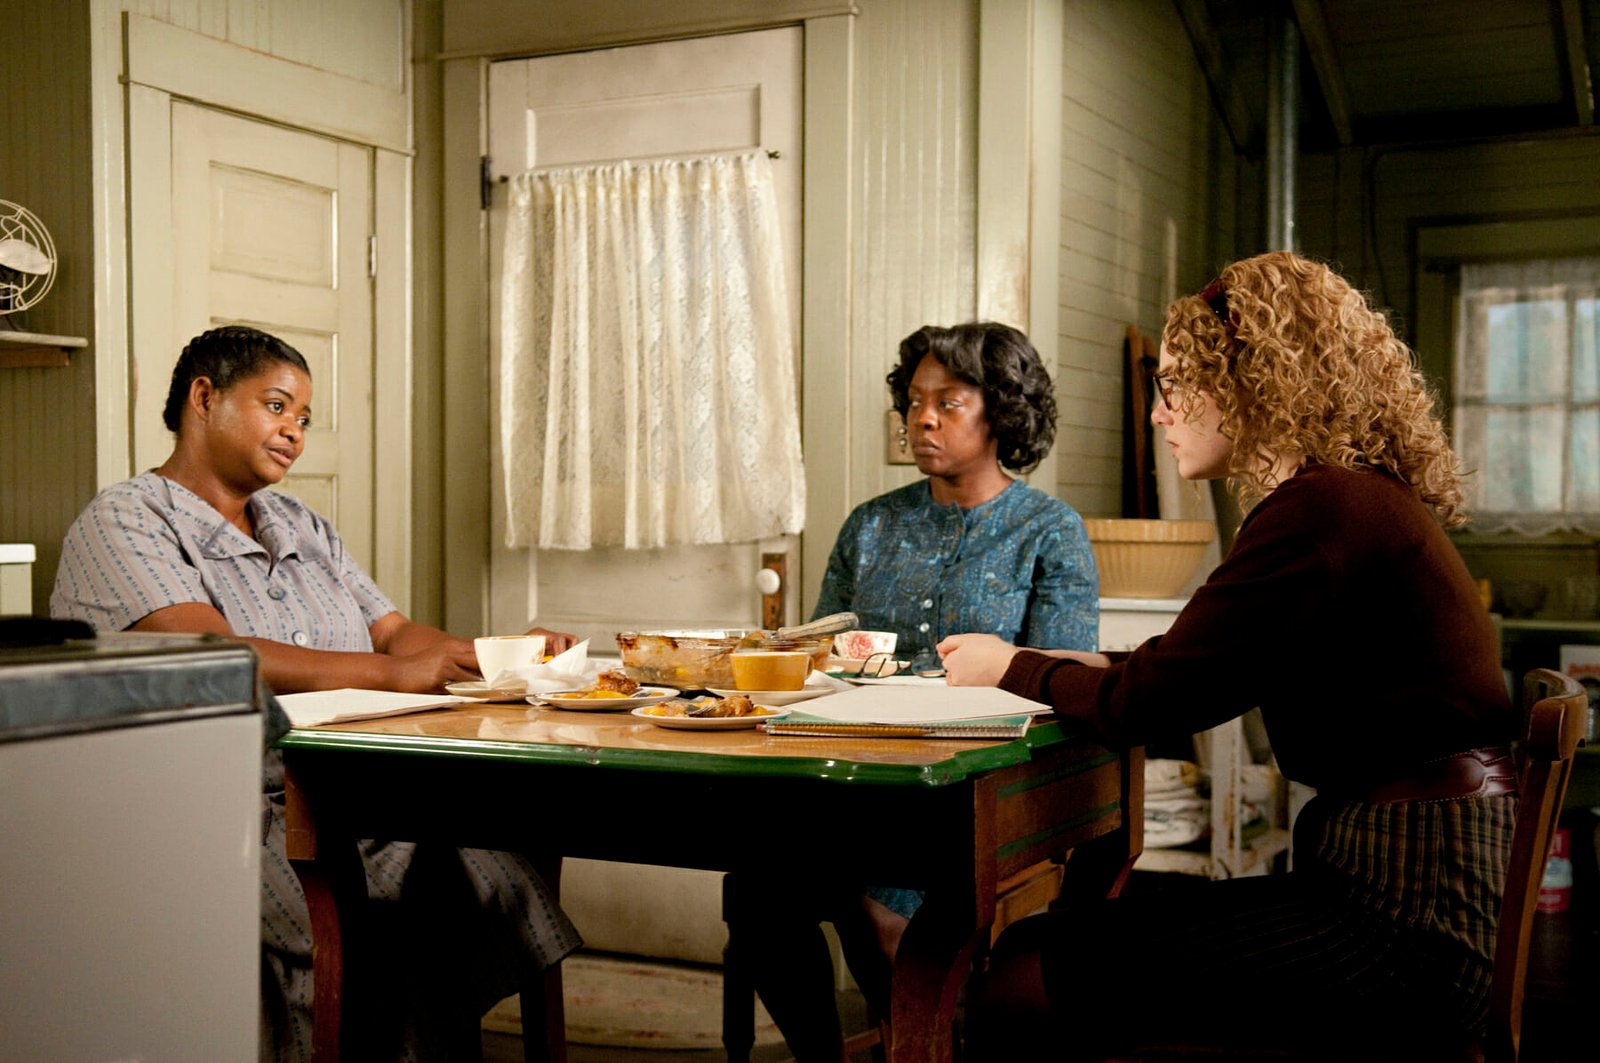 Inspirational movies: The Help (2011)